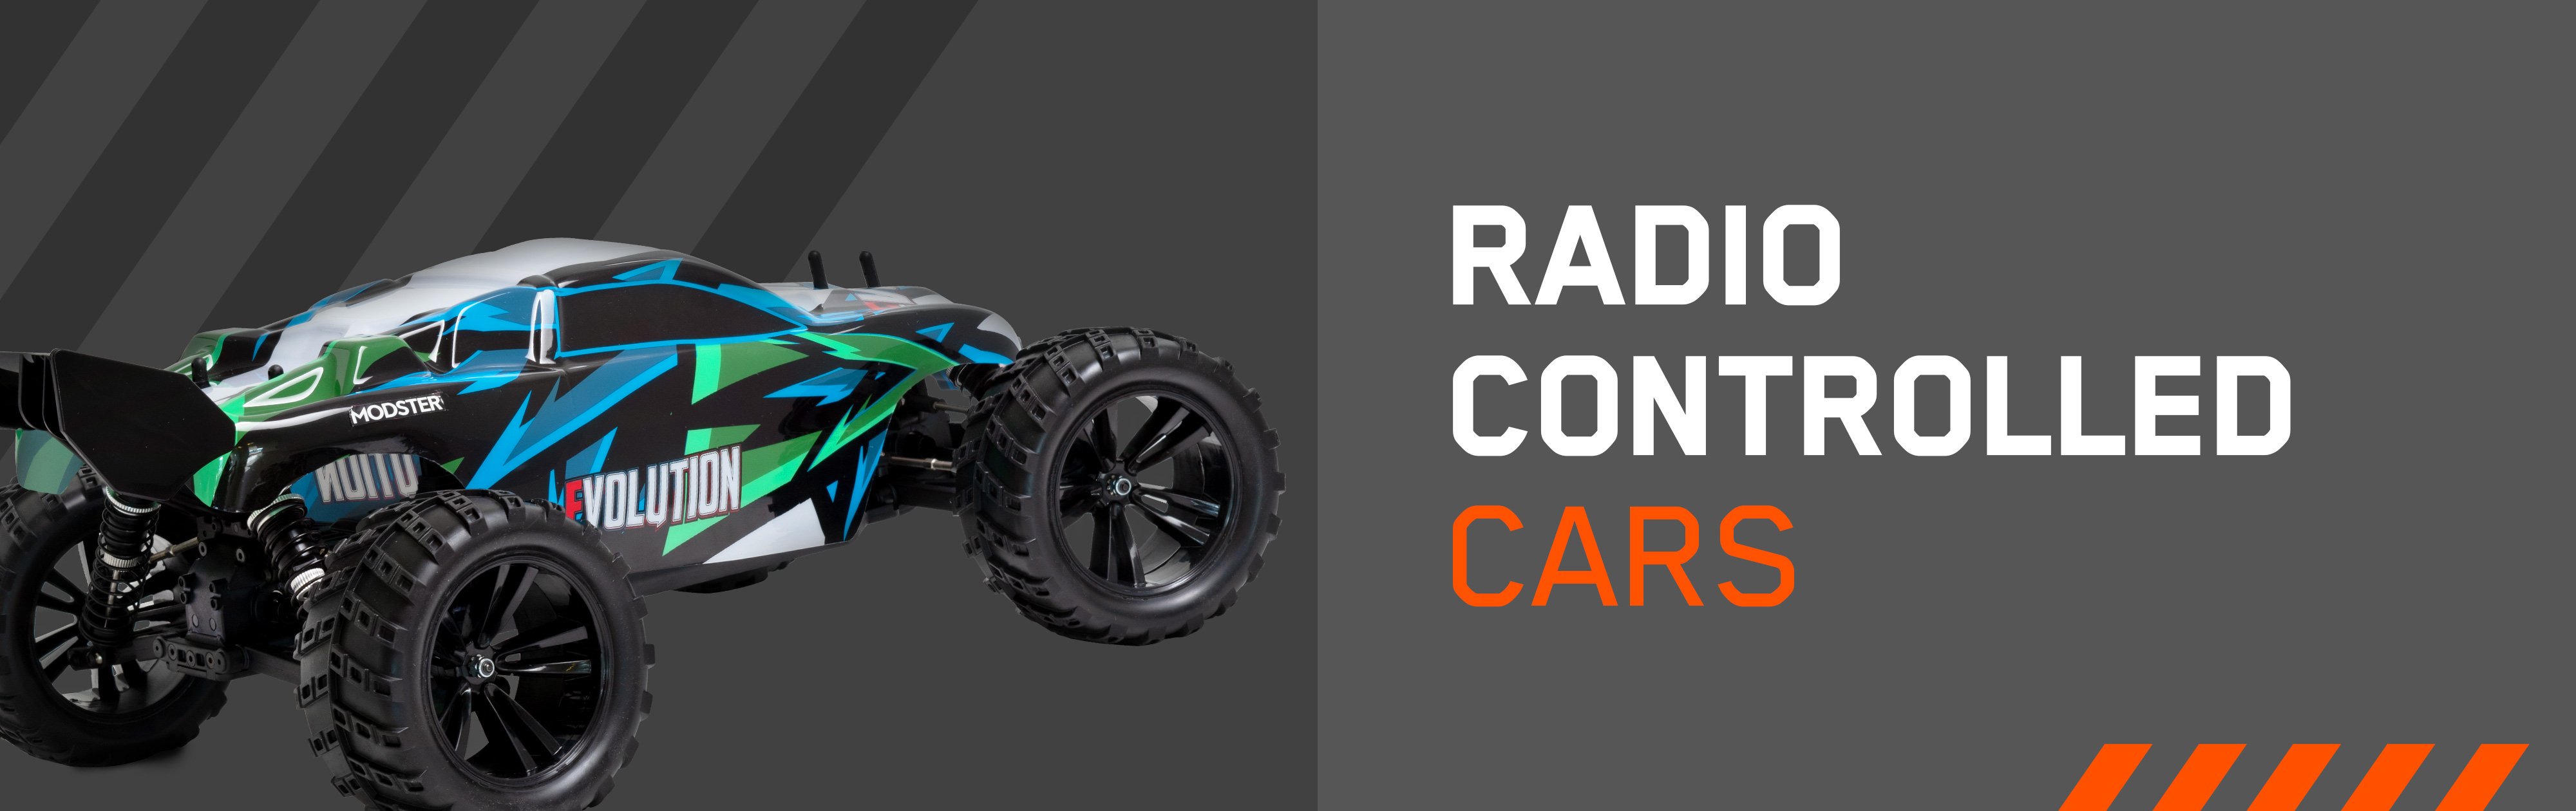 Modster-RC-Cars-kaufen